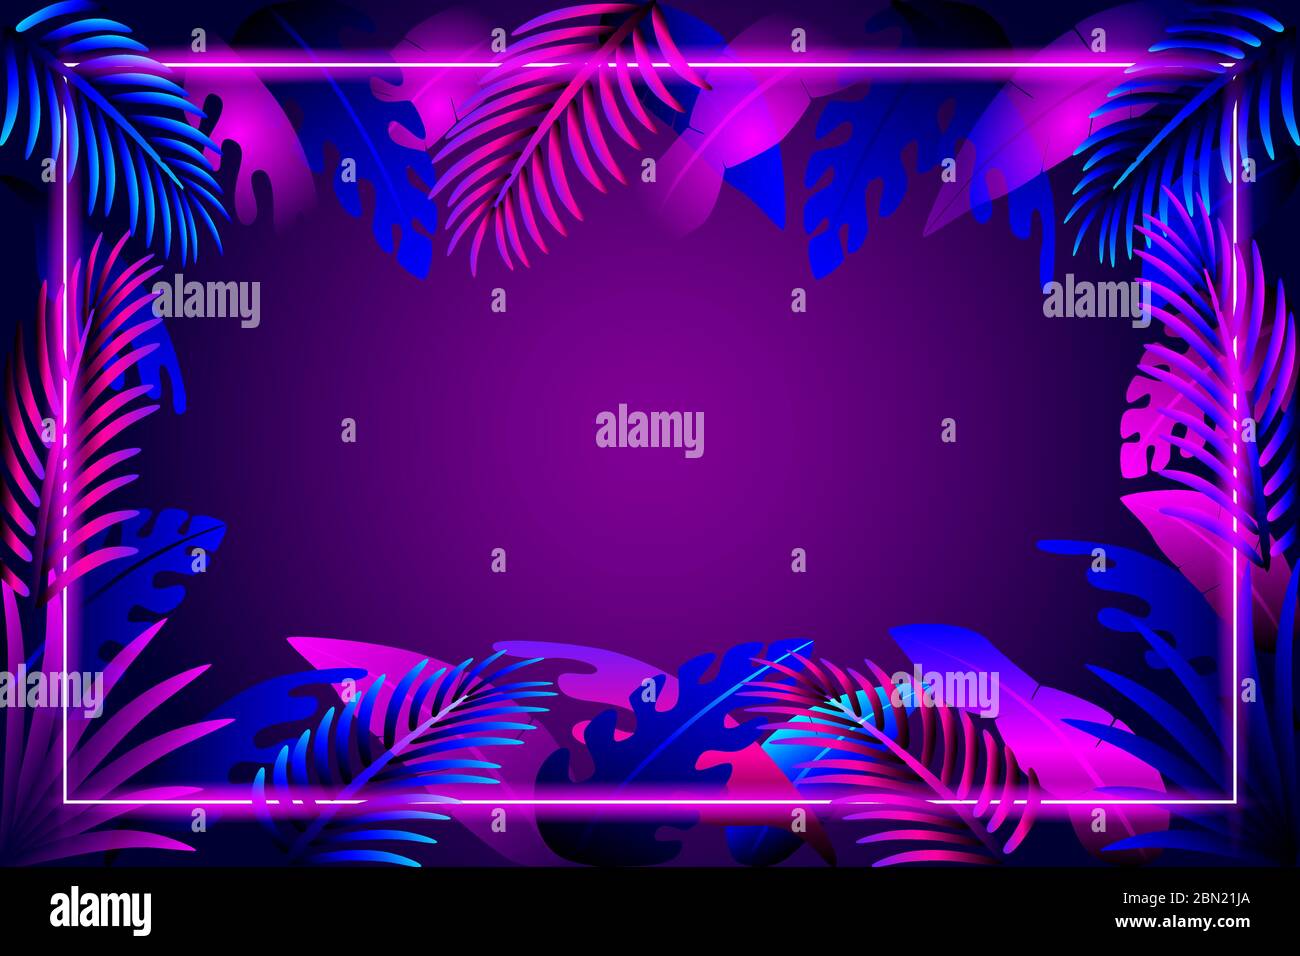 Abstract leaves background with neon frame free vector Stock Vector